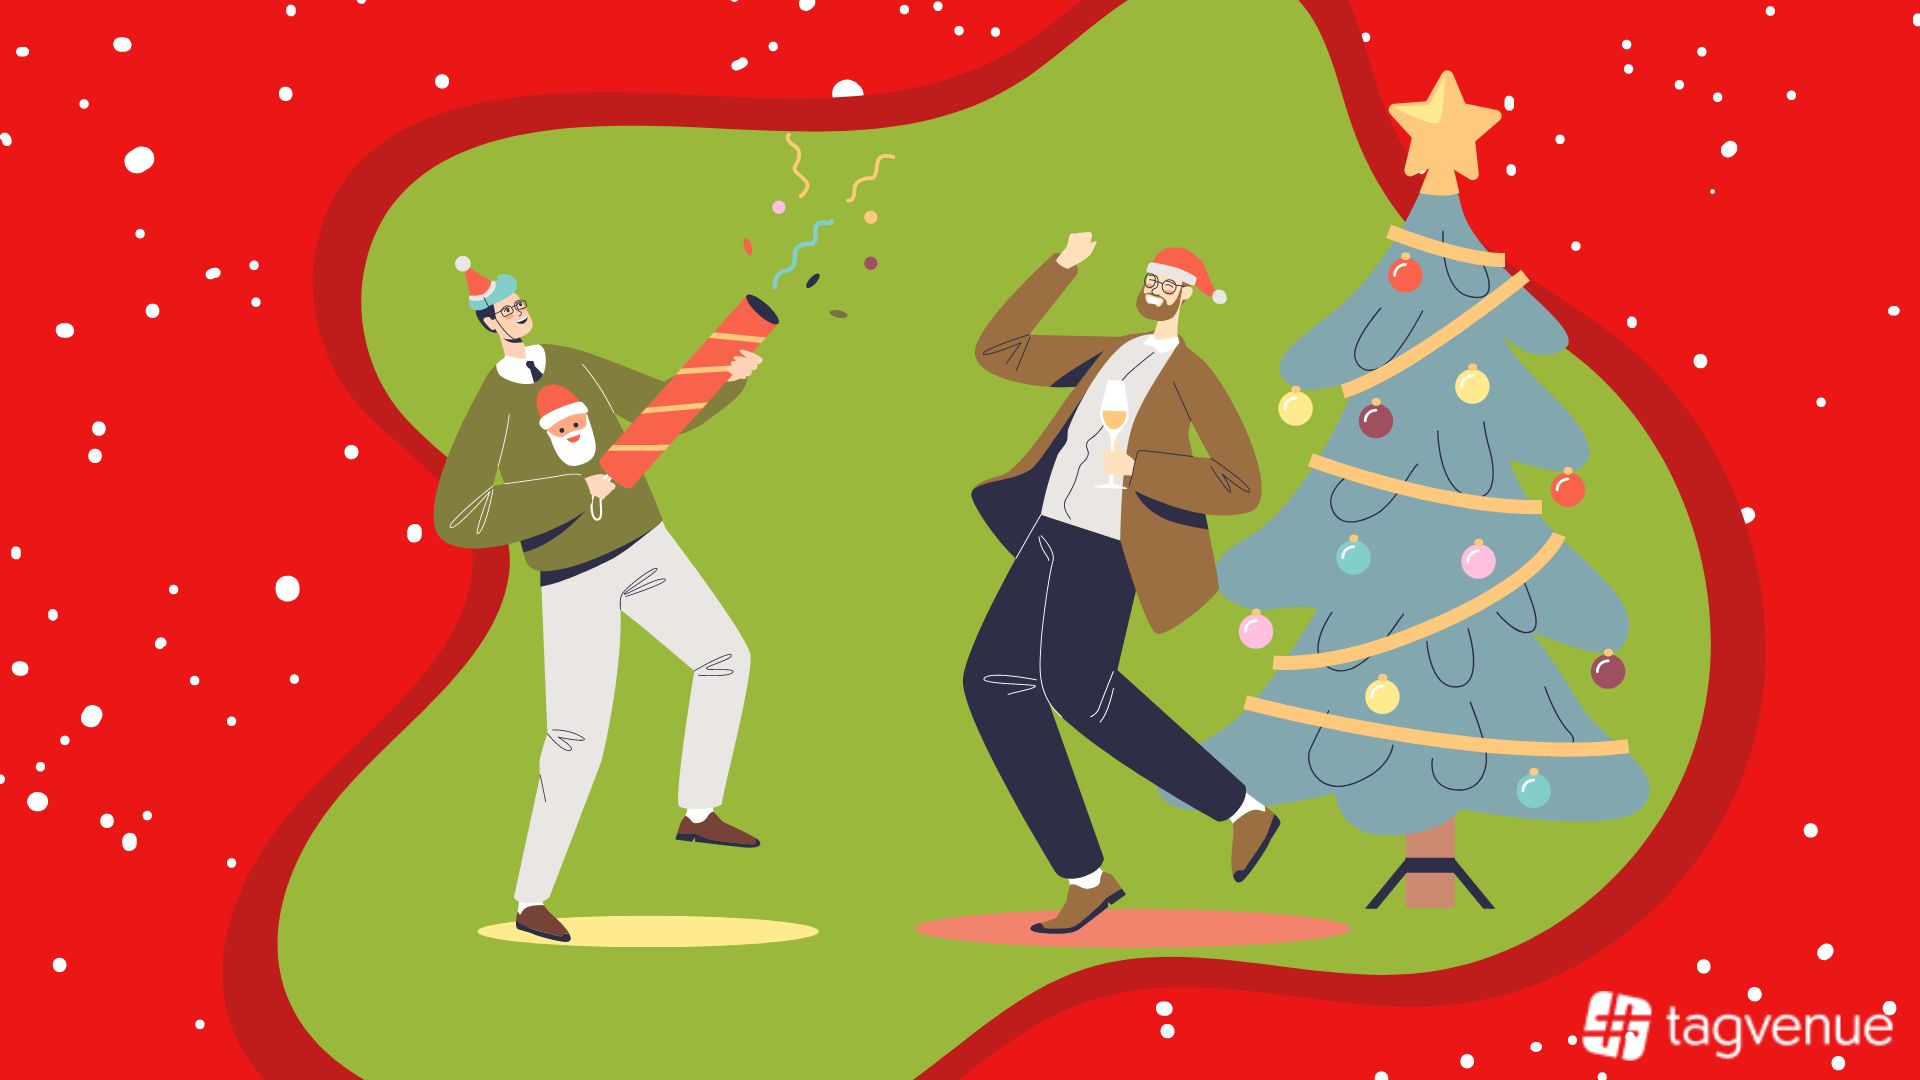 10 Funny Themes for Your Christmas Party - Tagvenue Blog